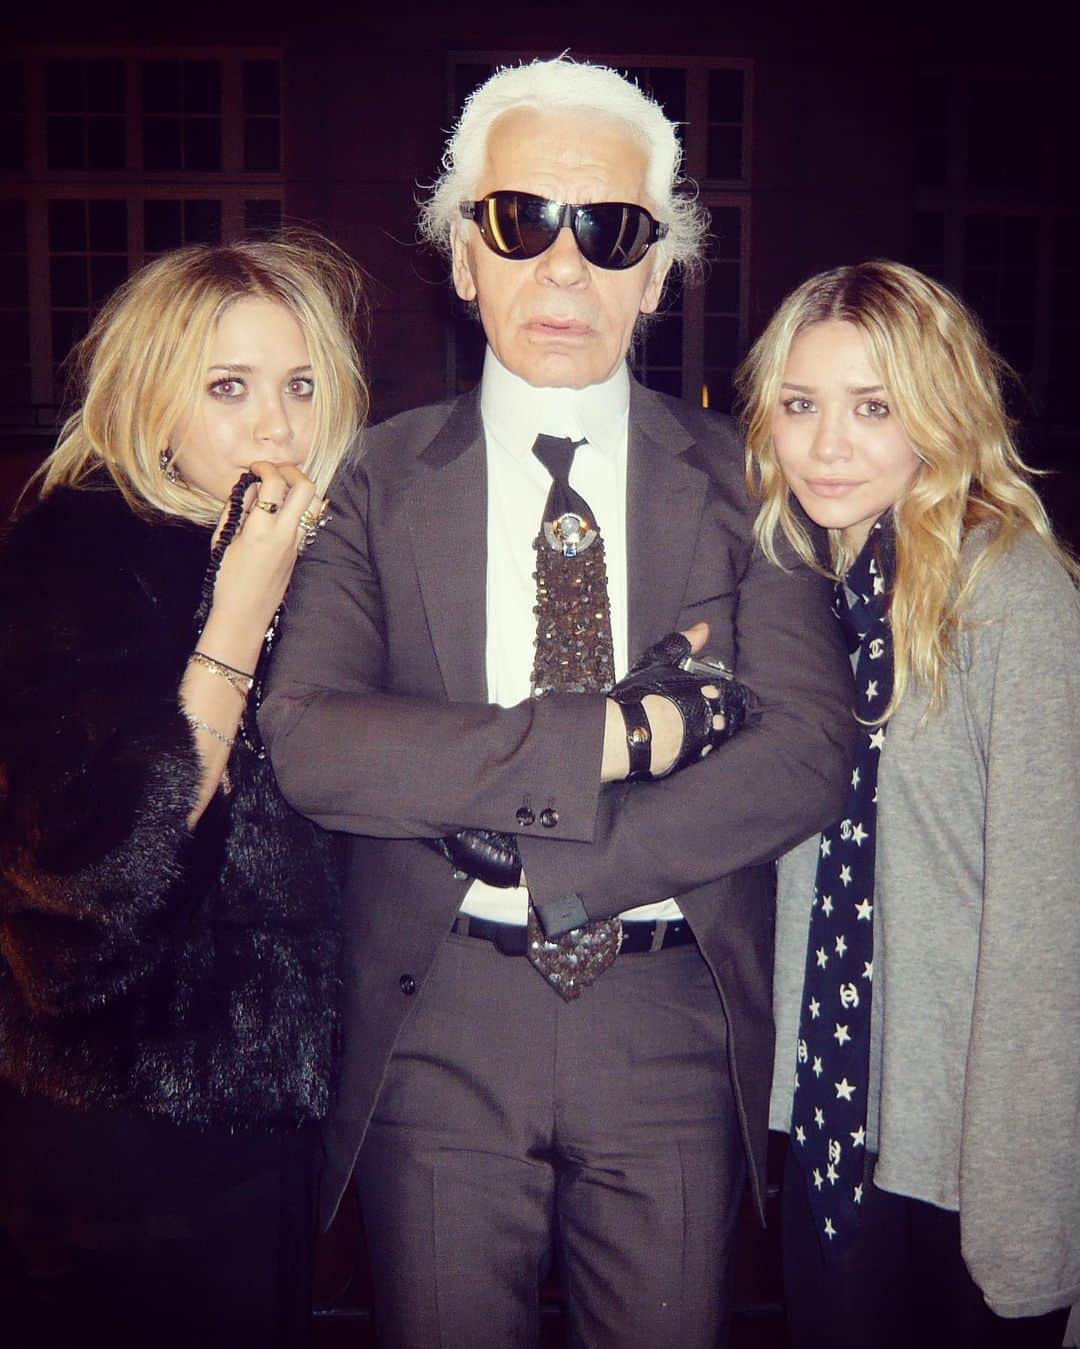 デレク・ブラスバーグのインスタグラム：「The irony of this year‘s #metgala theme is that its subject, Karl Lagerfeld, had a notorious disdain for nostalgia. “There is nothing worse than bringing up the 'good old days,” he once said. “To me, that's the ultimate acknowledgment of failure.” (The guy loved a one-liner. My other favorite Karl quotes: “If you are cheap, nothing helps,” and, “Trendy is the last stage before tacky.”) Even though Karl didn’t like to look back, seeing so much of him and his work dominate the cultural conversation again has been wonderful. The first time I went to his studio was in 2007, when Mary-Kate and Ashley Olsen invited him to be a subject of their book, “Influence,” which I worked on. He sat behind a desk bursting with books, sketches, iPod, markers, Diet Cokes and tear sheets while the Chanel studio swirled around him. In the years that followed, I worked with him on shoots and stories and trips around the world, from LA to Venice, from Edinburgh to Dallas. (I took the third pic at a Texan party with a mechanical bull.) Each experience with him was a pinch me moment because we all knew we were in the presence of greatness. He never complained, he never explained, he never slowed down. He could do ten jobs at once and still end every conversation with a devastating quip. He gave me a nickname, Beau Derek (get it?), that validated my whole existence every time he called me by it. What I miss most about Karl is his cheeky sense of humor, and how he’d make clever, devilish comments just to test if people could keep up with his wit. The fashion world has felt a little less fabulous without him, so I’m looking forward to all our feeds being dominated by King Karl again. Find me on @voguemagazine’s live stream from the red carpet tomorrow at 630pm exclusively on Vogue.com」